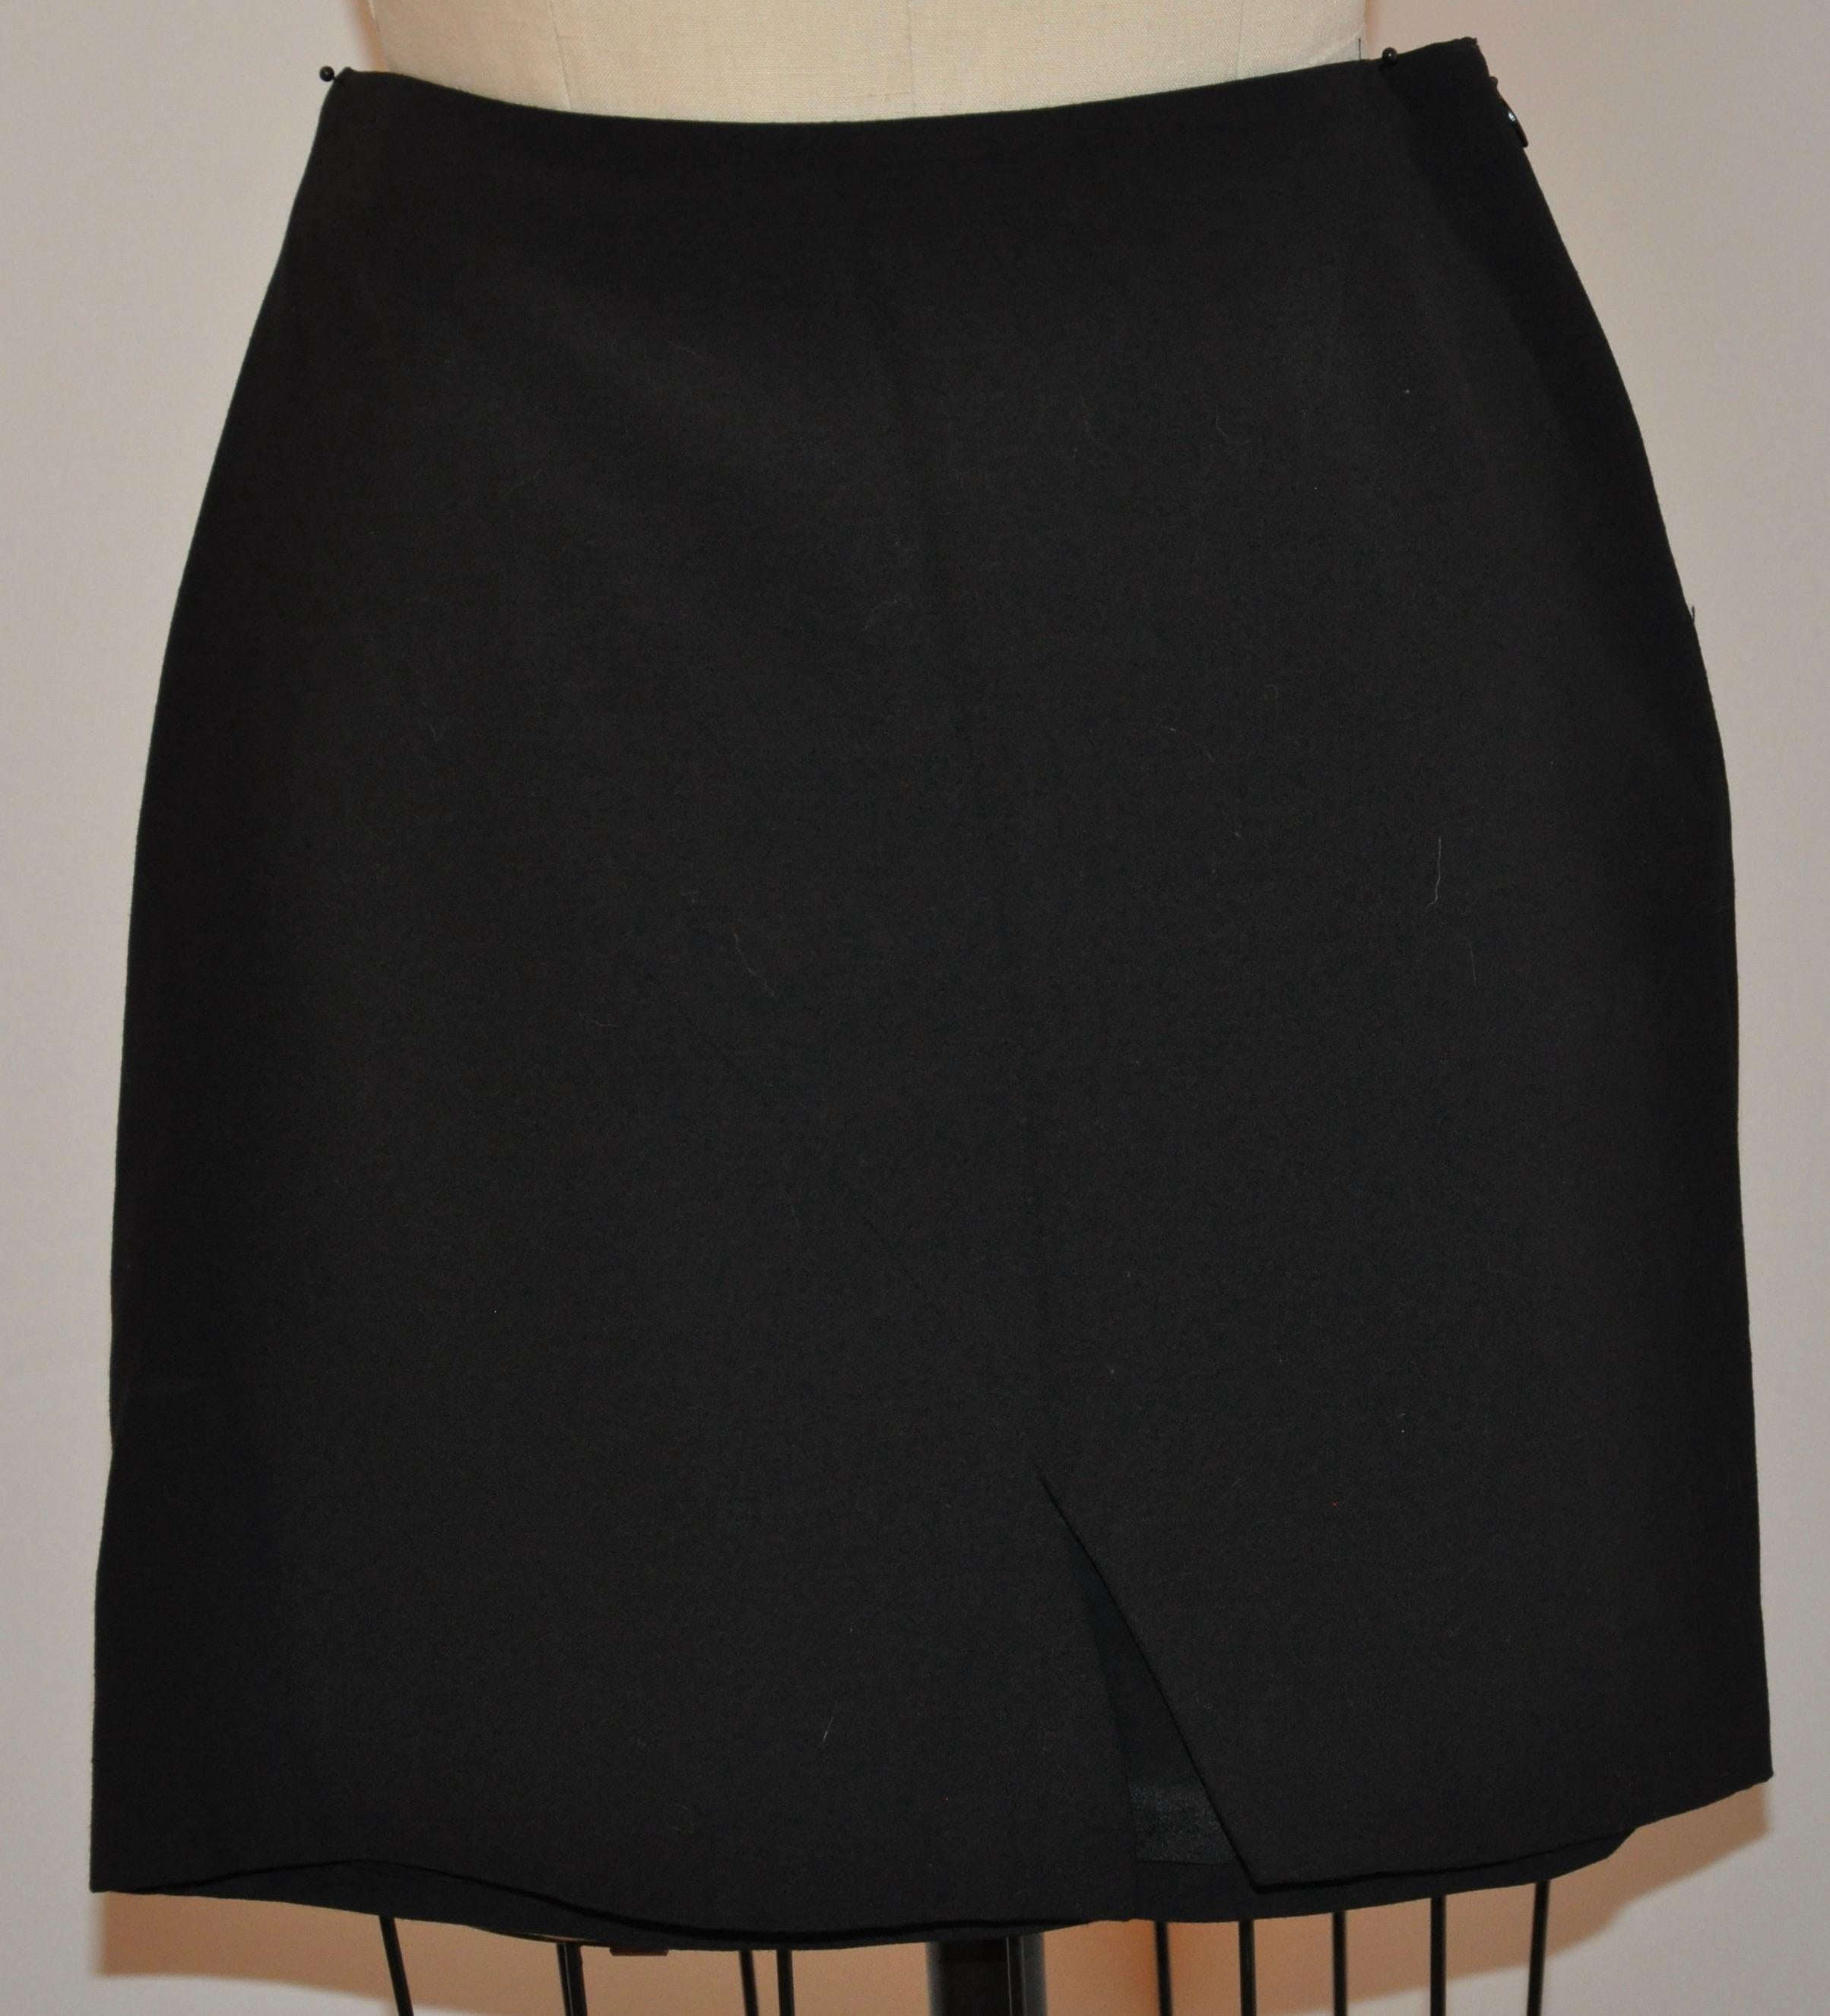 Gucci wonderfully detailed asymmetric jet-black English wool stitched form-fitting mini skirt features asymmetric stitched (on the front side) from right to left, and on the back, from left to right. The center-front asymmetric slit measures 4 1/4